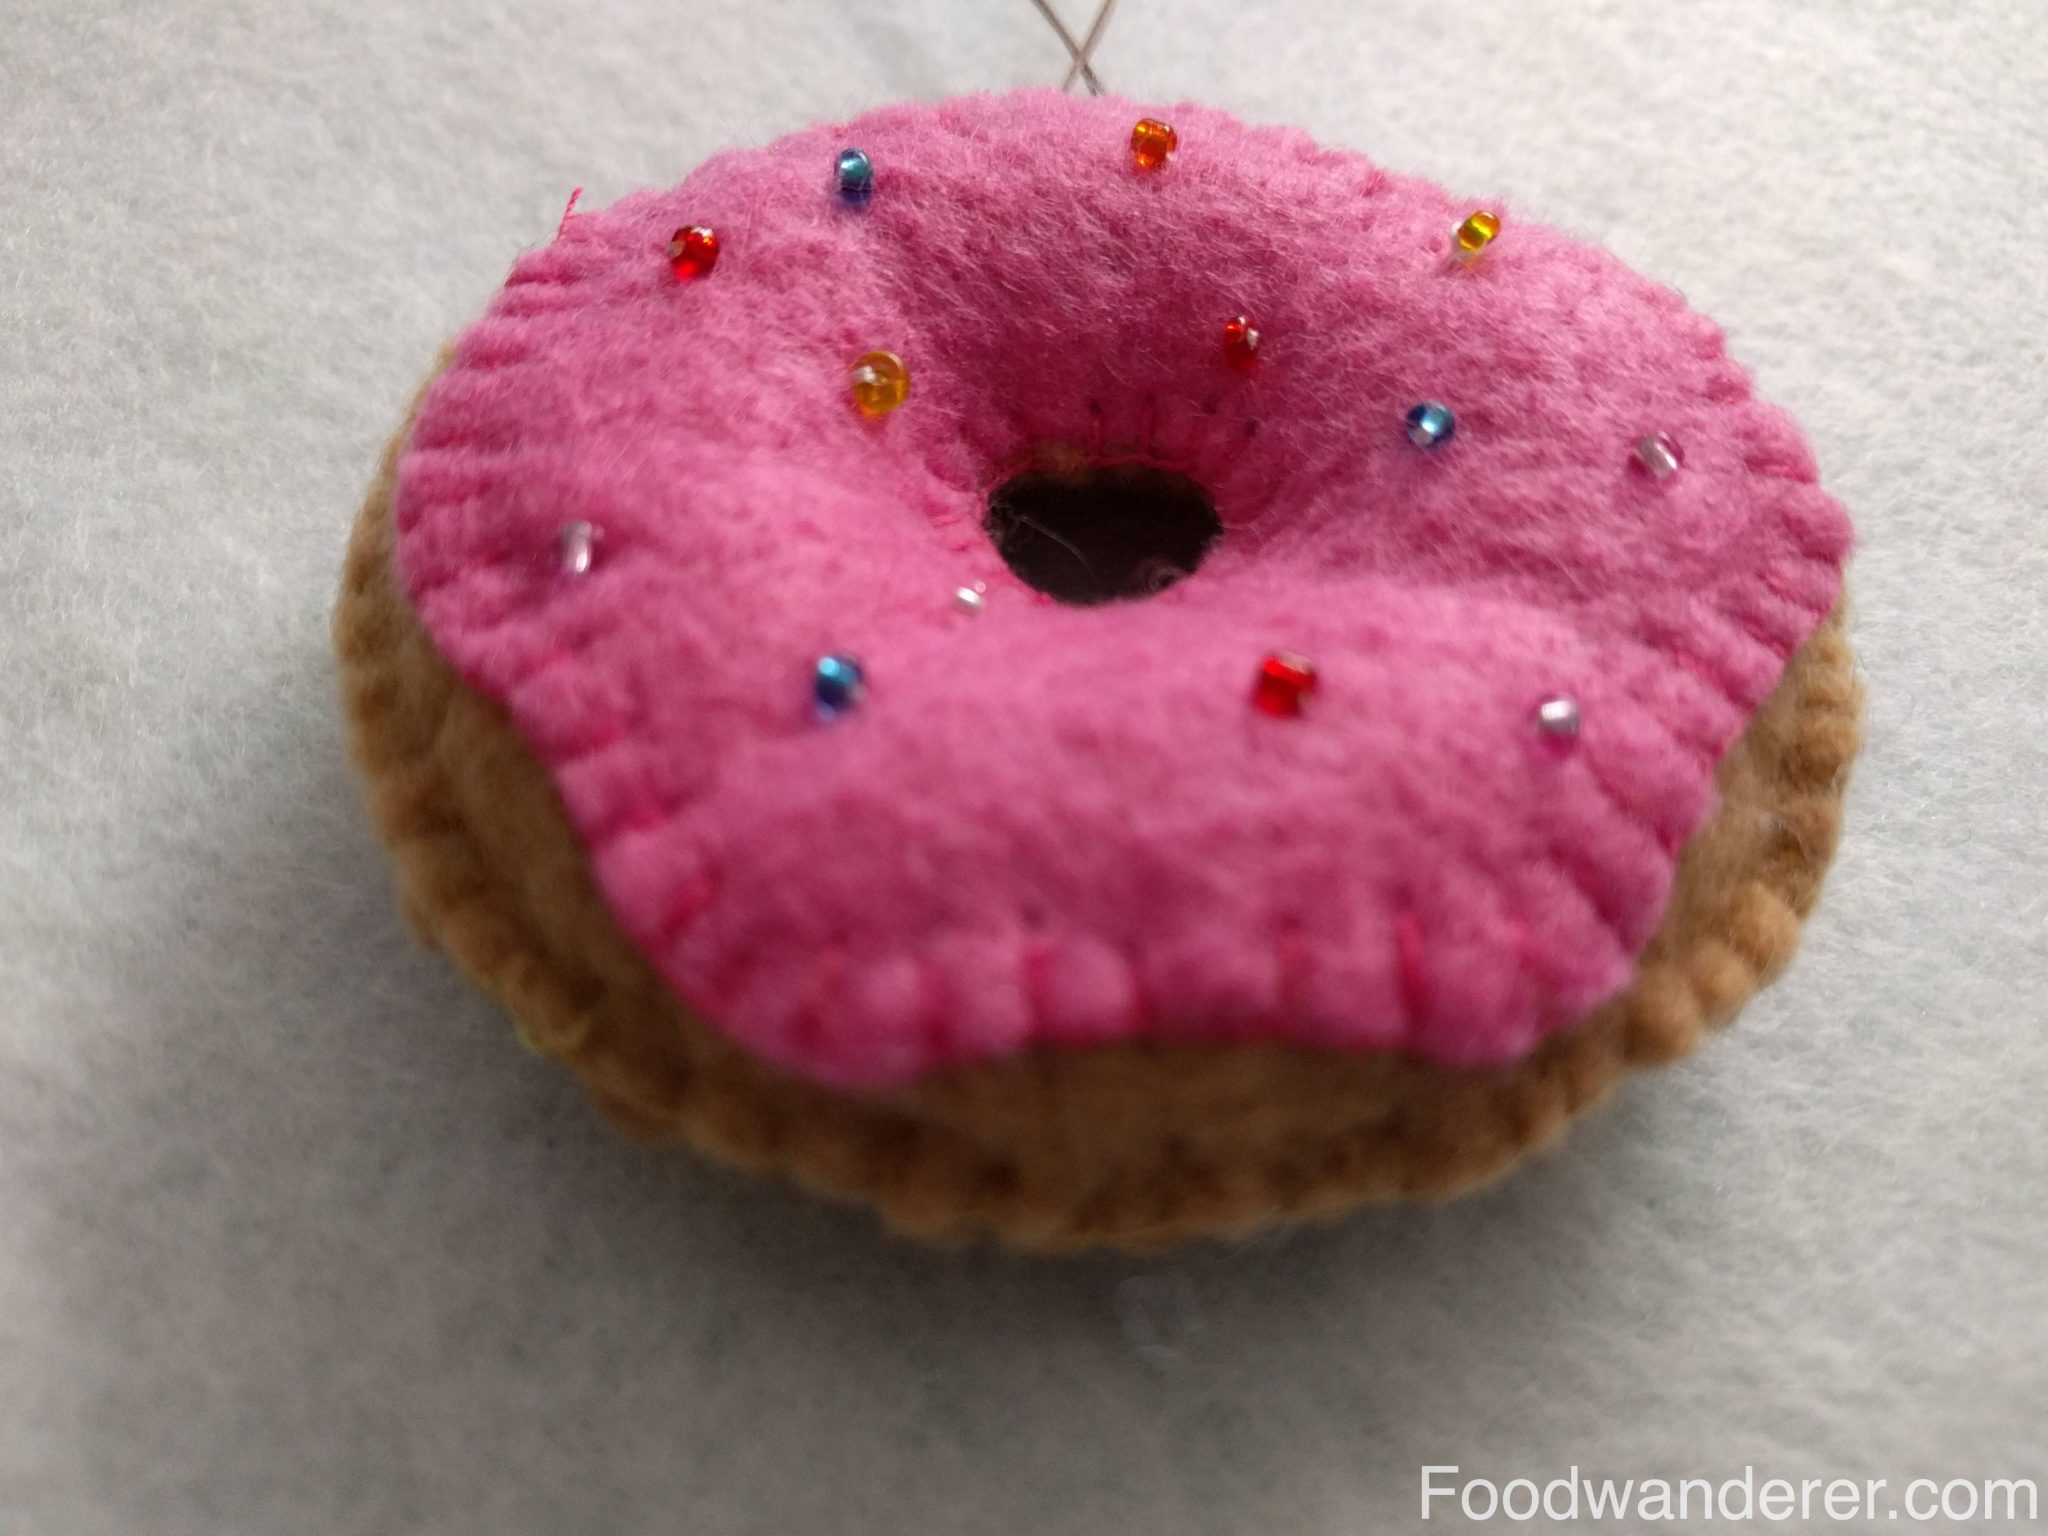 Foodwanderer’s Etsy Shop For Cute Felt Ornaments